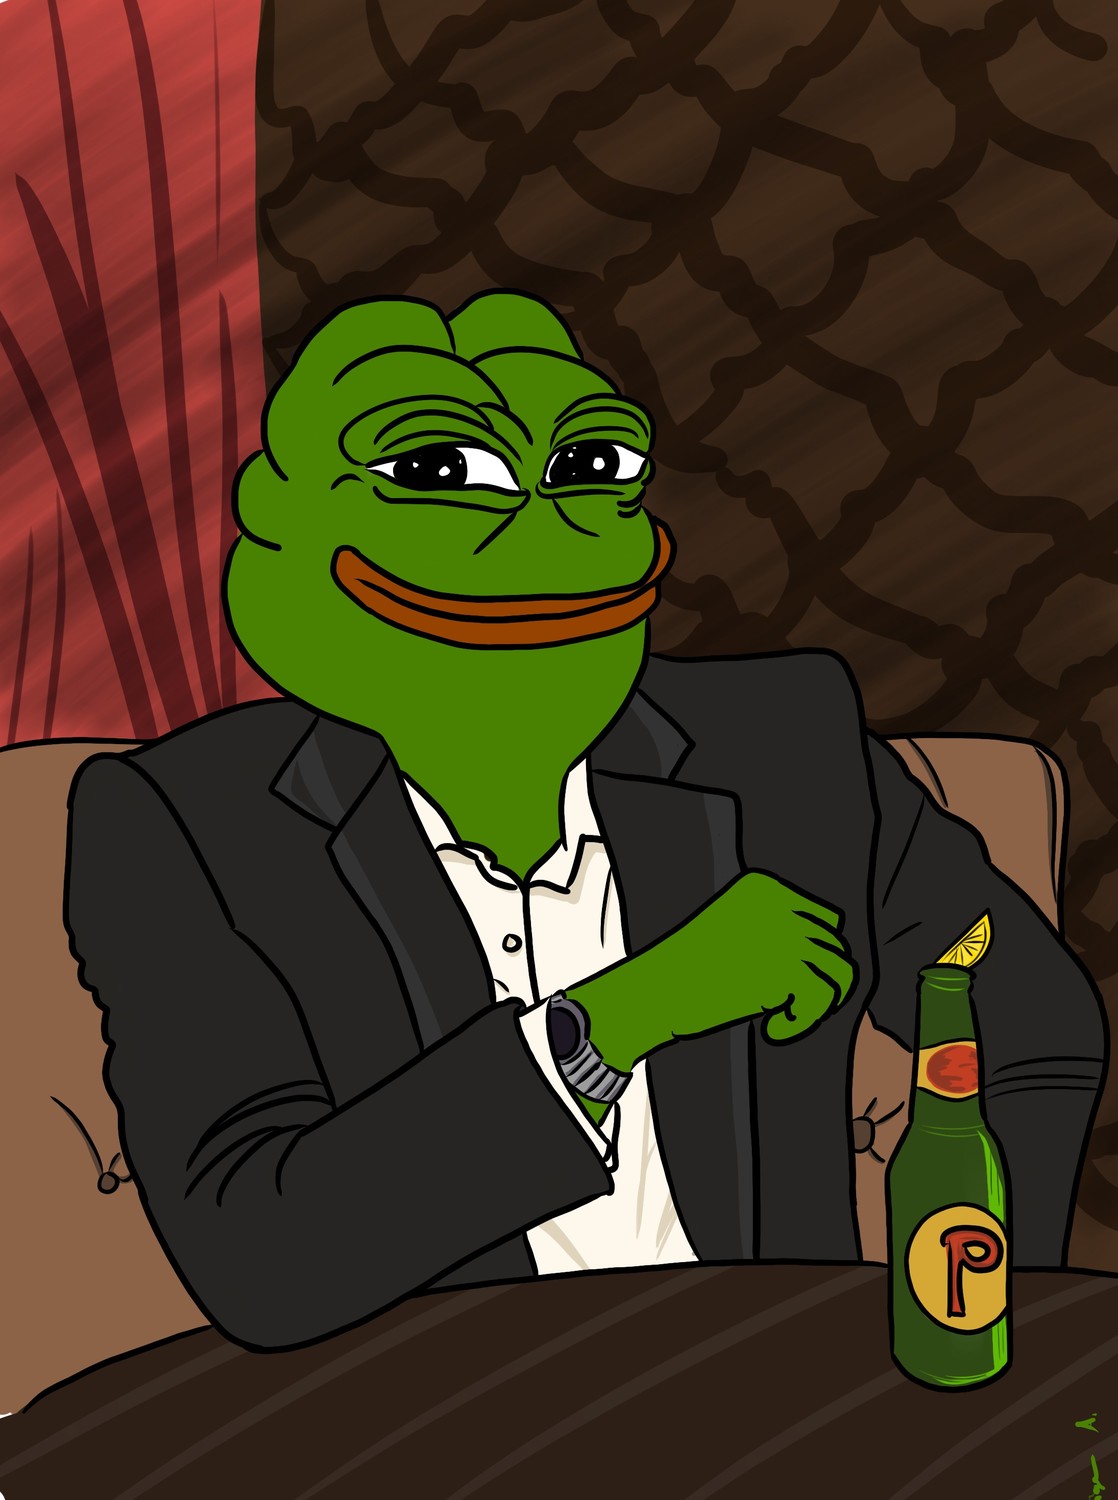 I don't always Pepe - Pepe The Frog